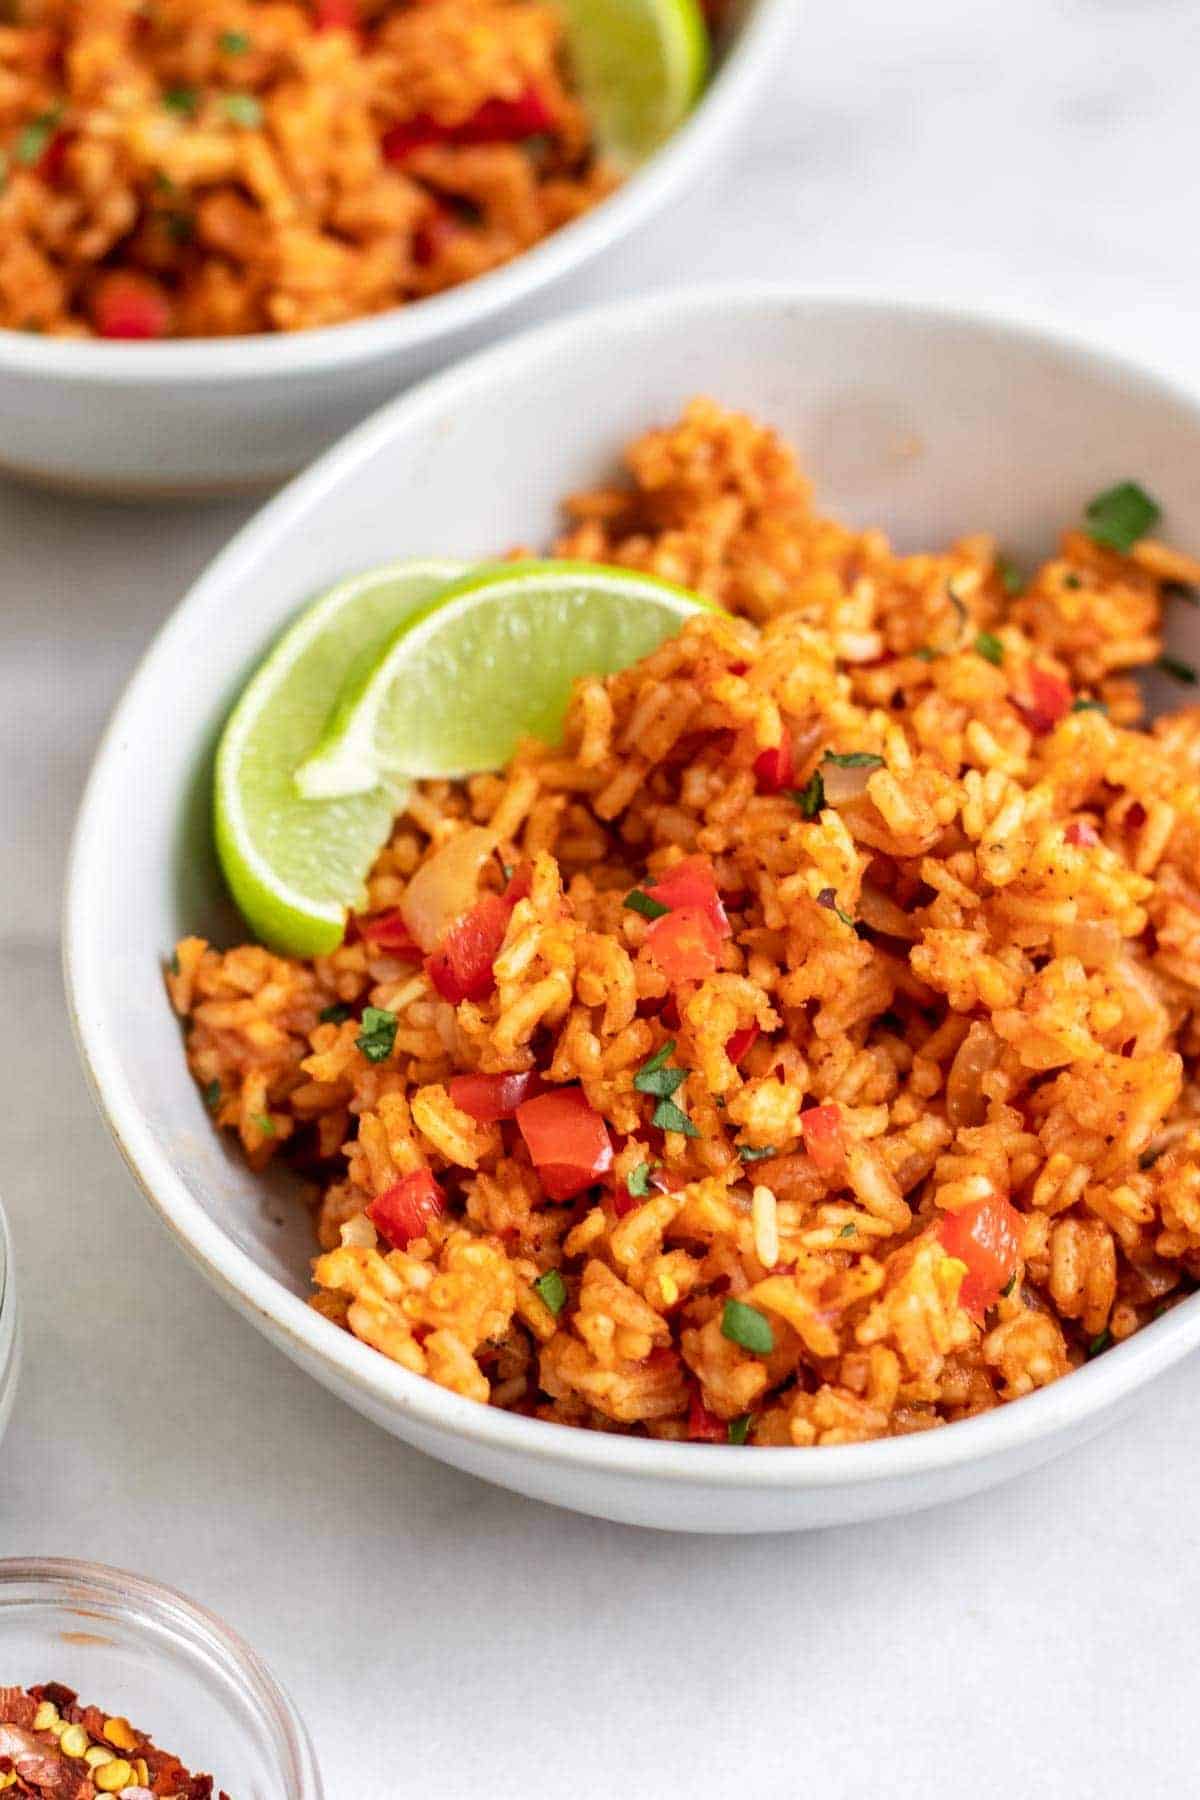 Easy One Pot Vegan Mexican Rice Eat With Clarity,How To Change A Light Socket Uk